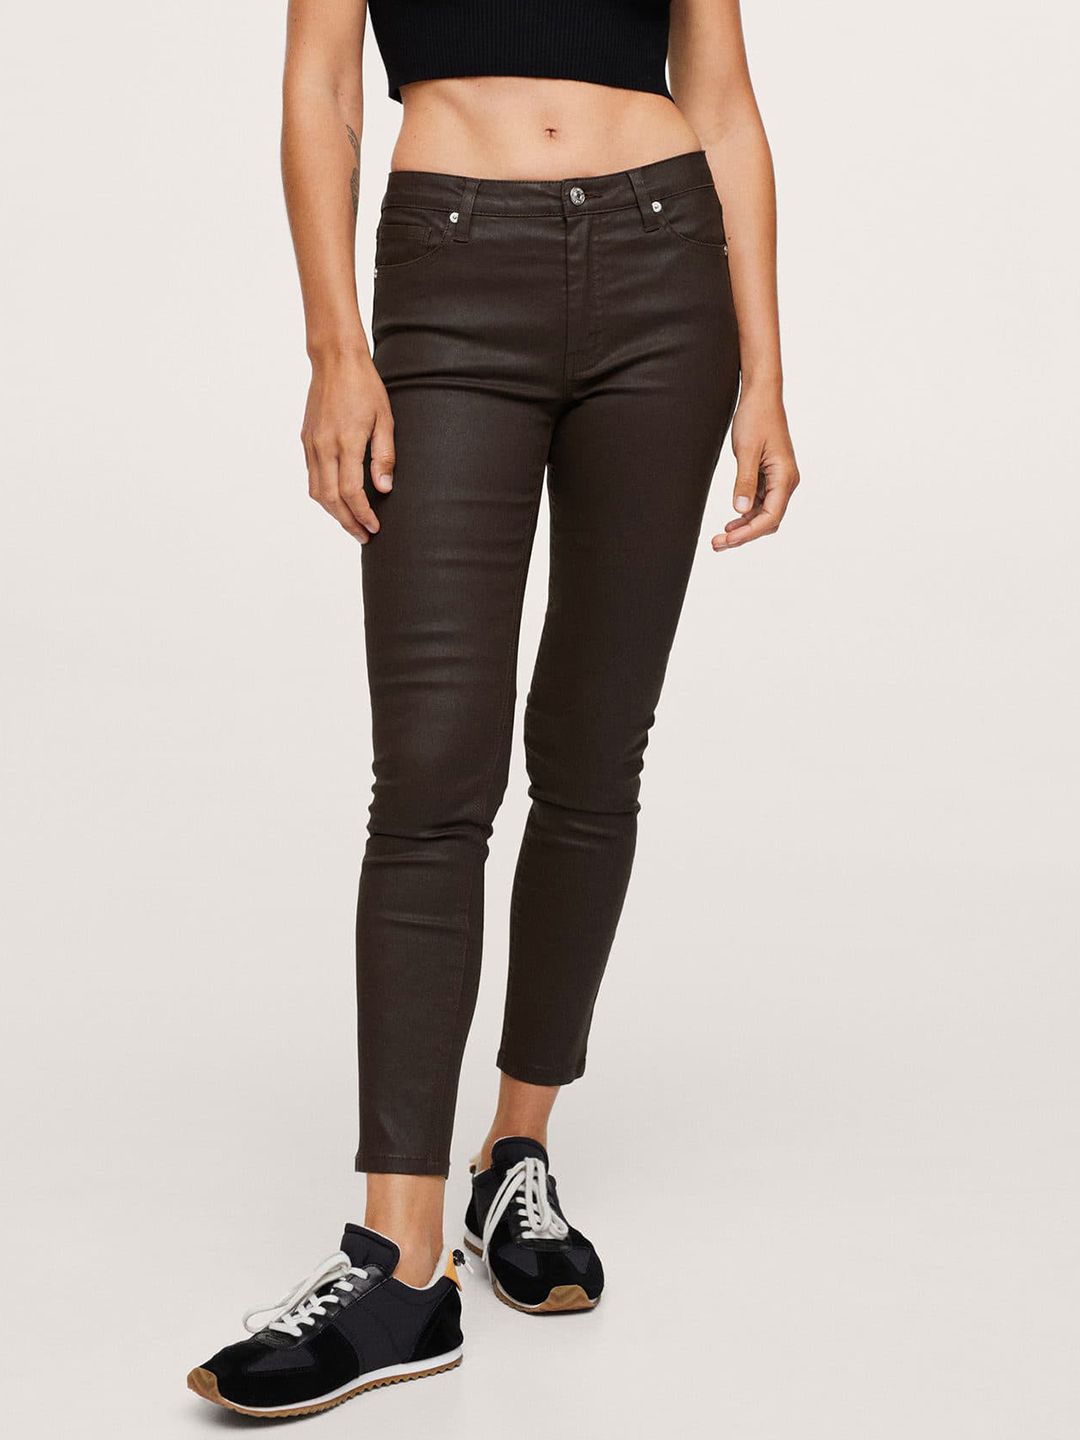 MANGO Women Black Skinny Fit Cropped Stretchable Jeans Price in India